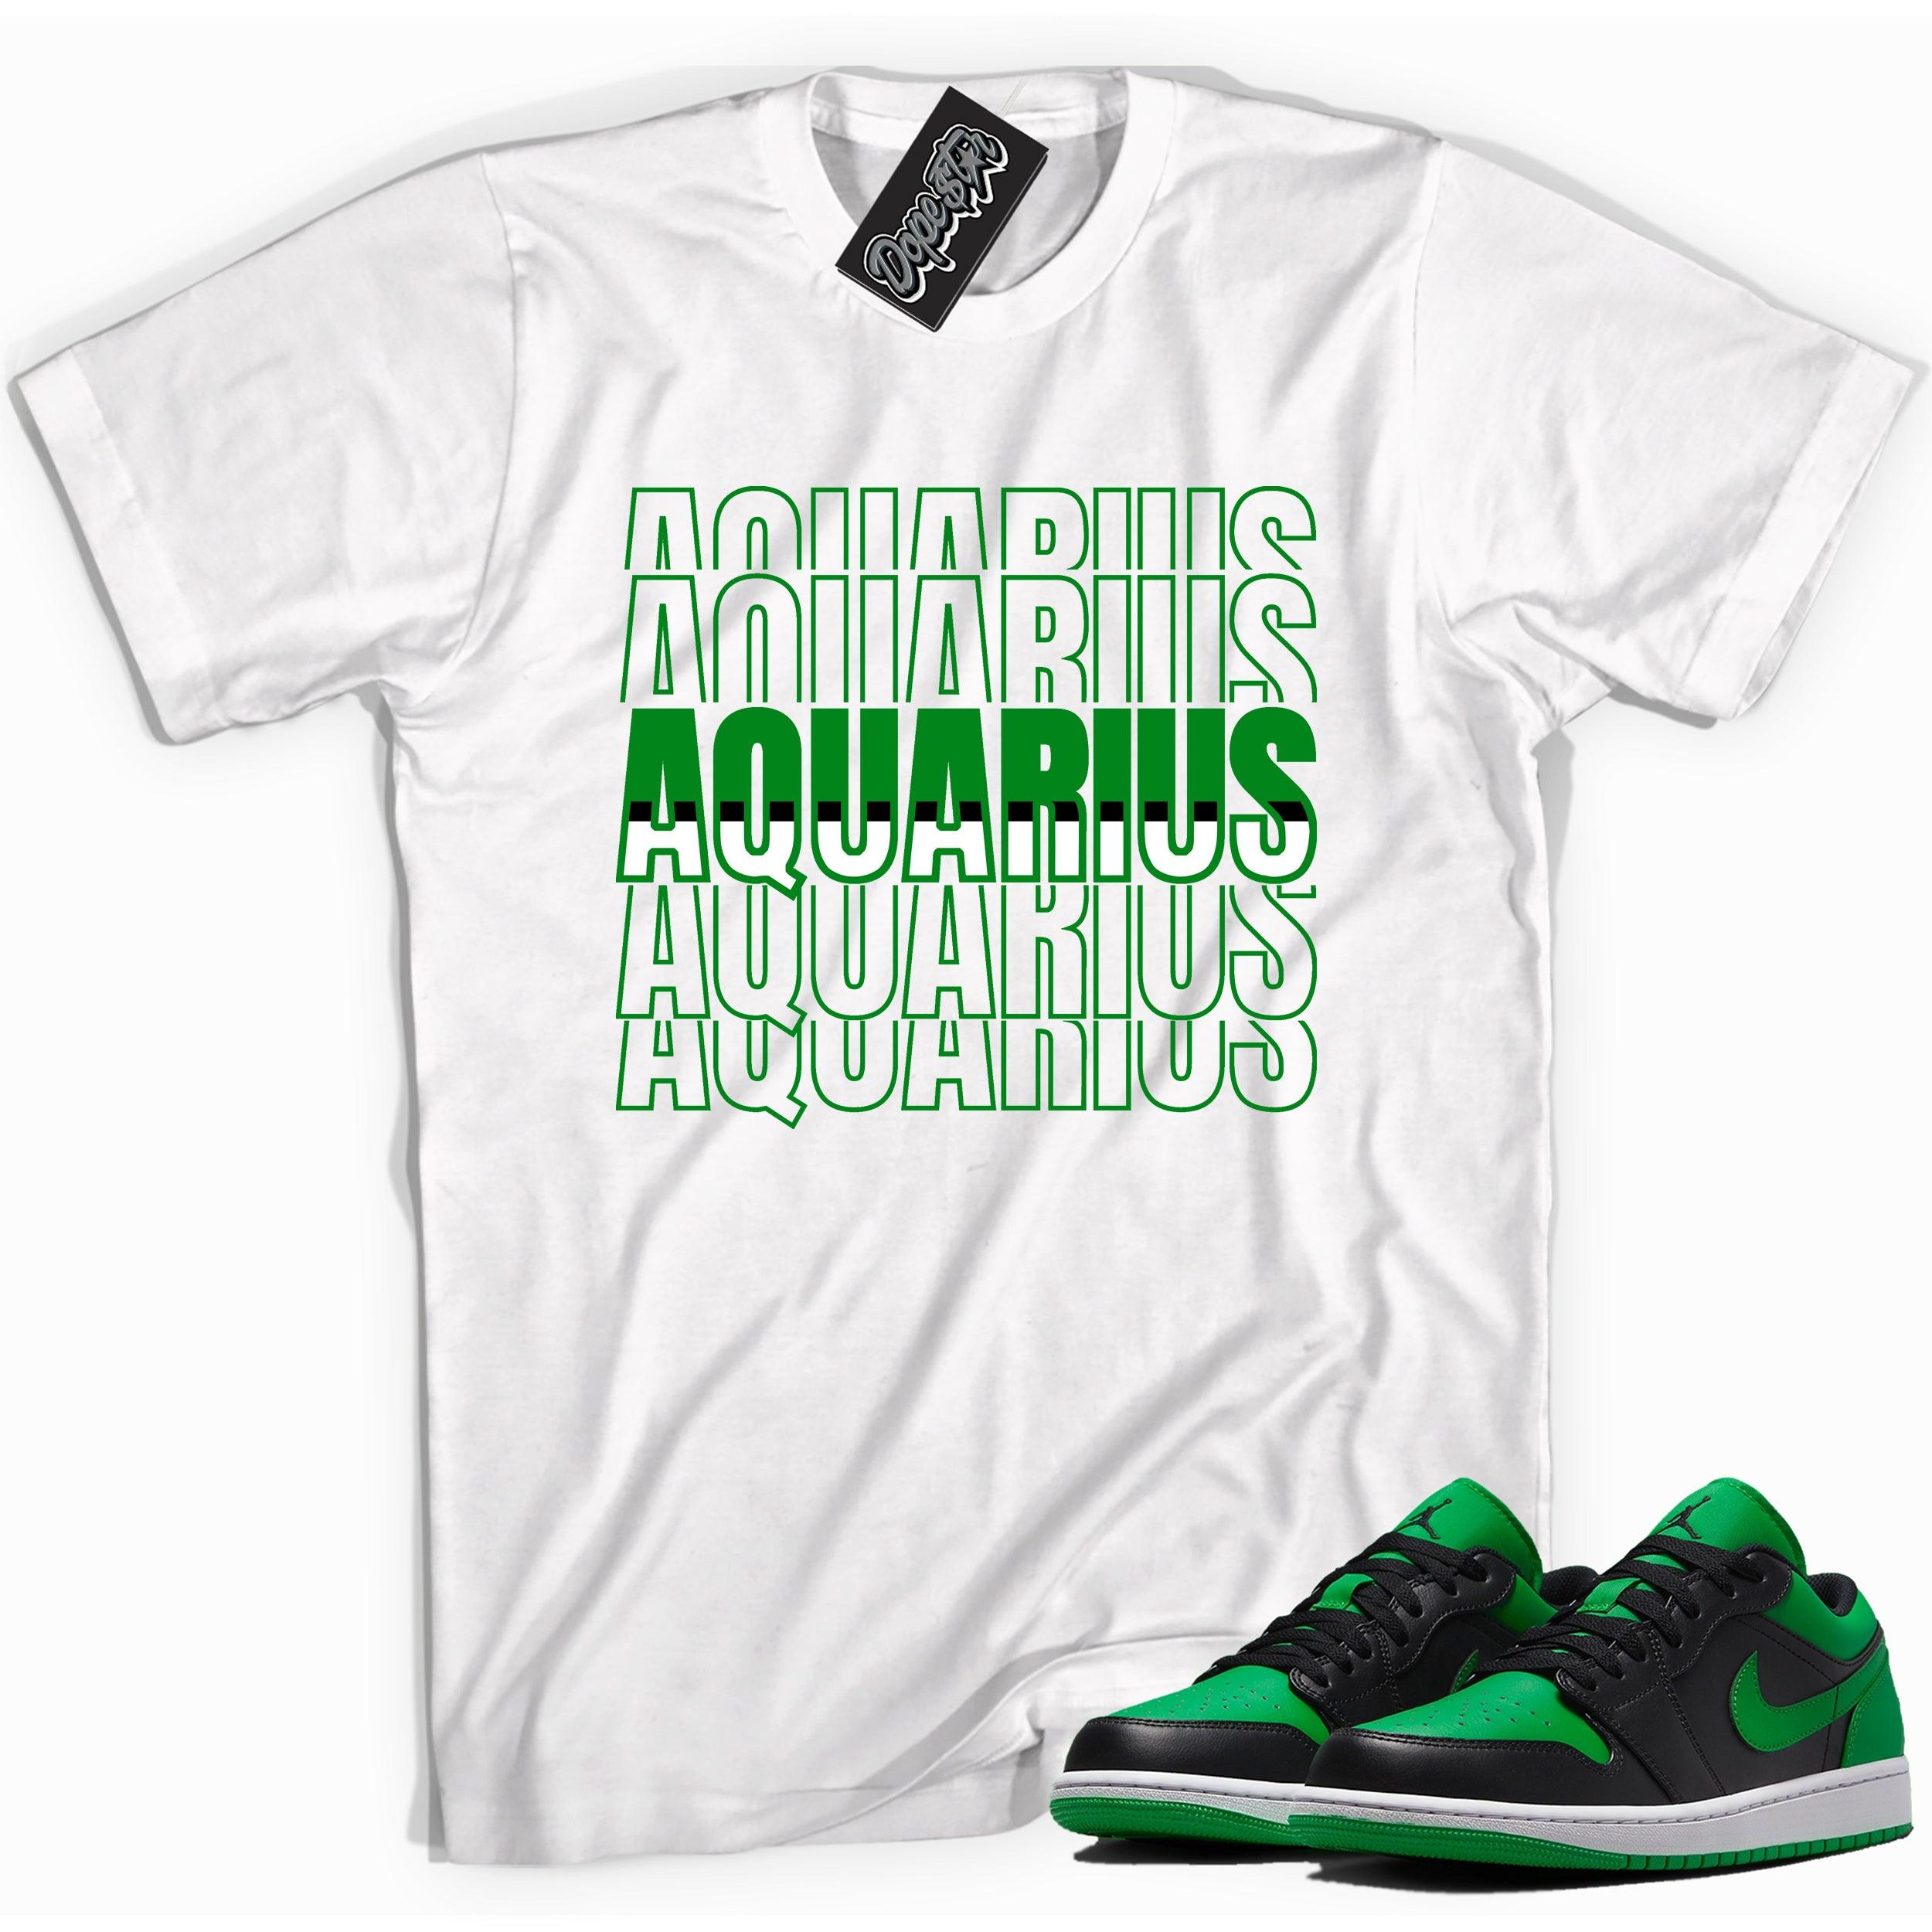 Cool white graphic tee with 'Aquarius' print, that perfectly matches Air Jordan 1 Low Lucky Green sneakers